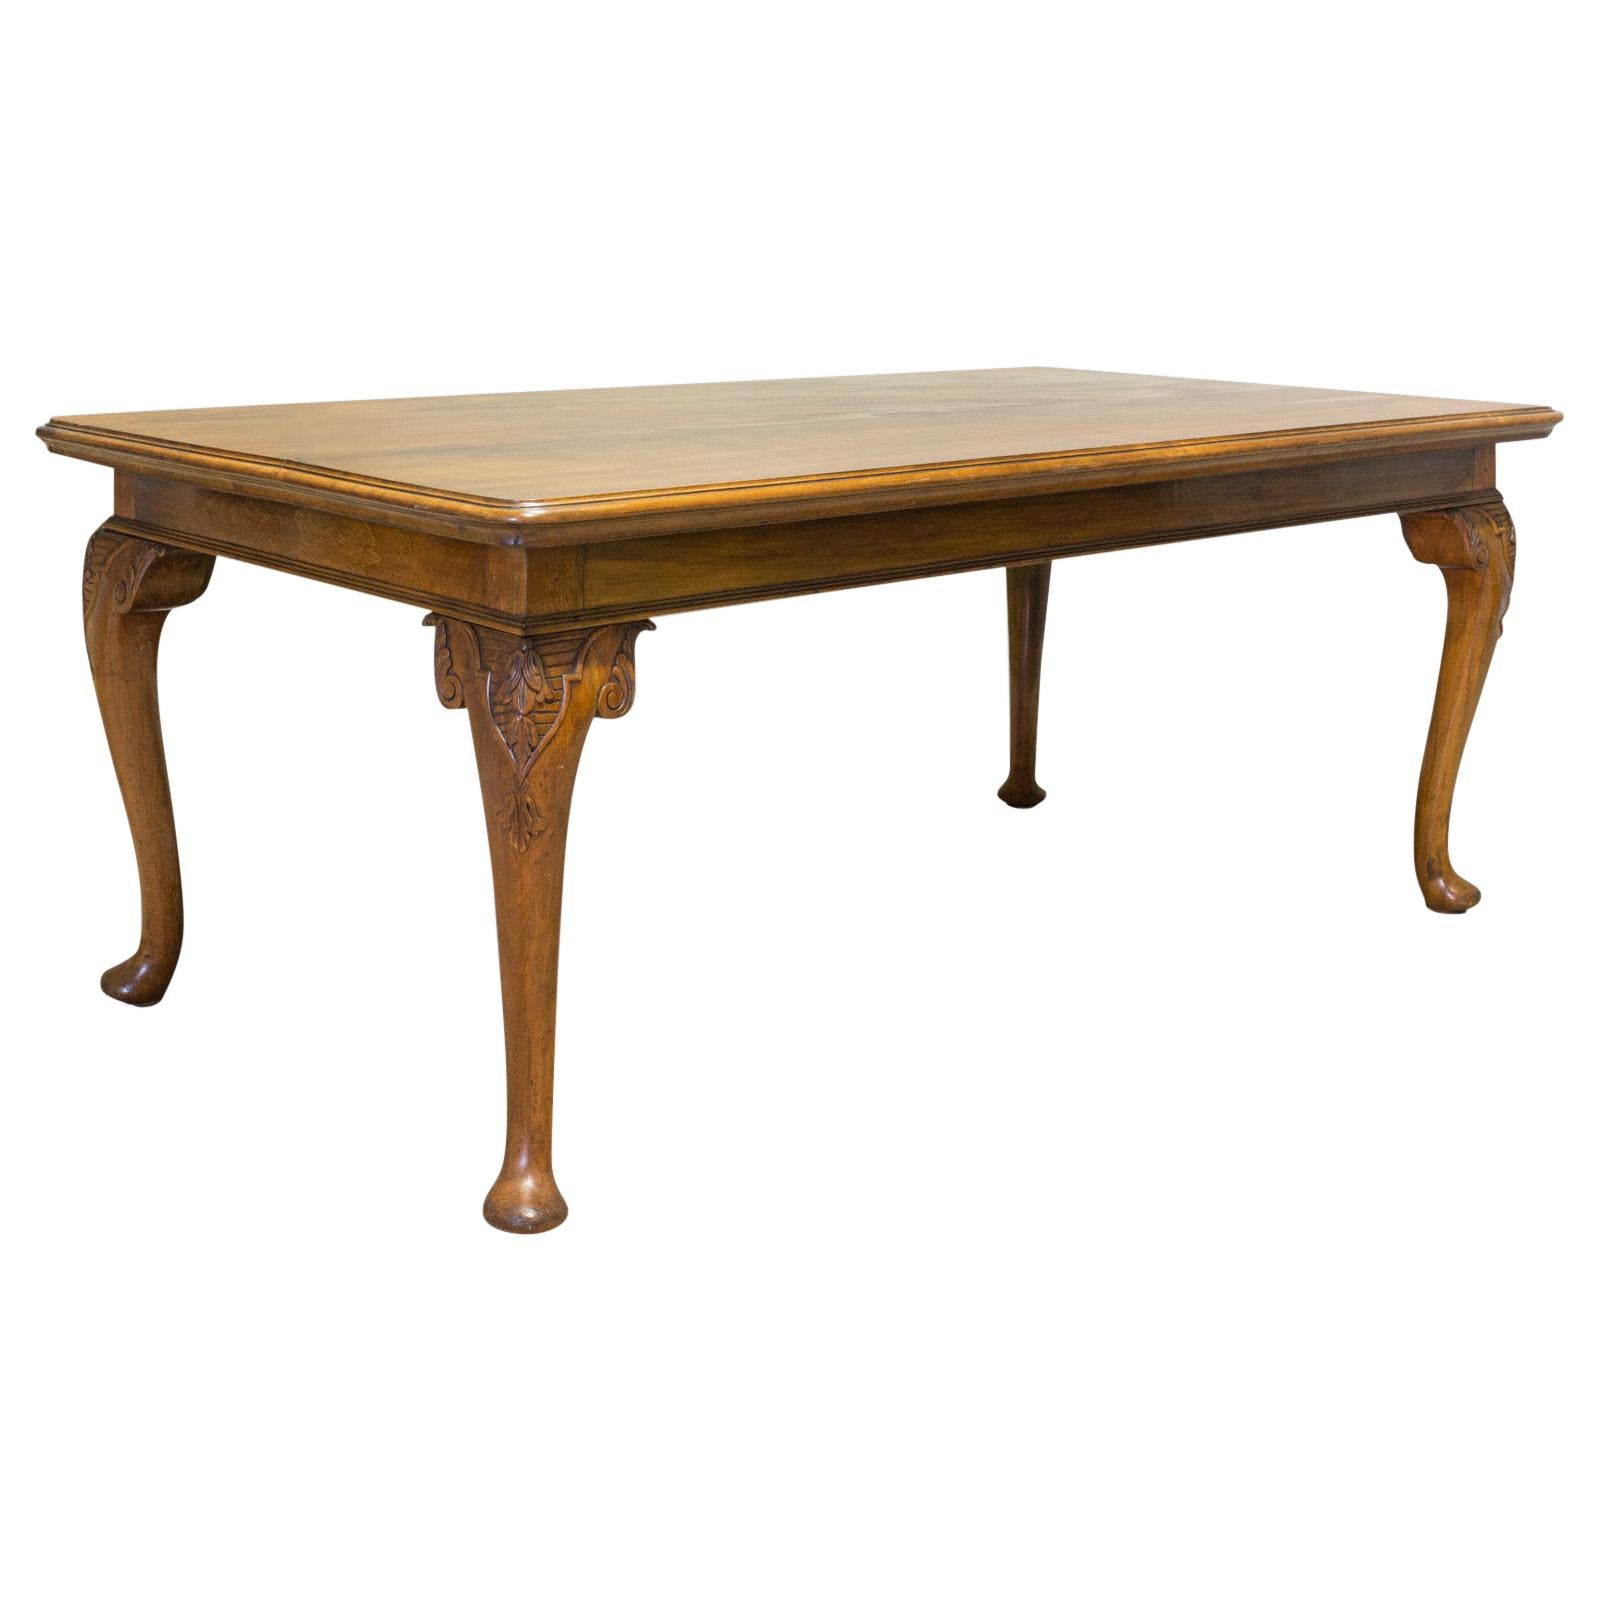 Large Antique Dining Table, French, Walnut, Country House, Seats 6, circa 1900